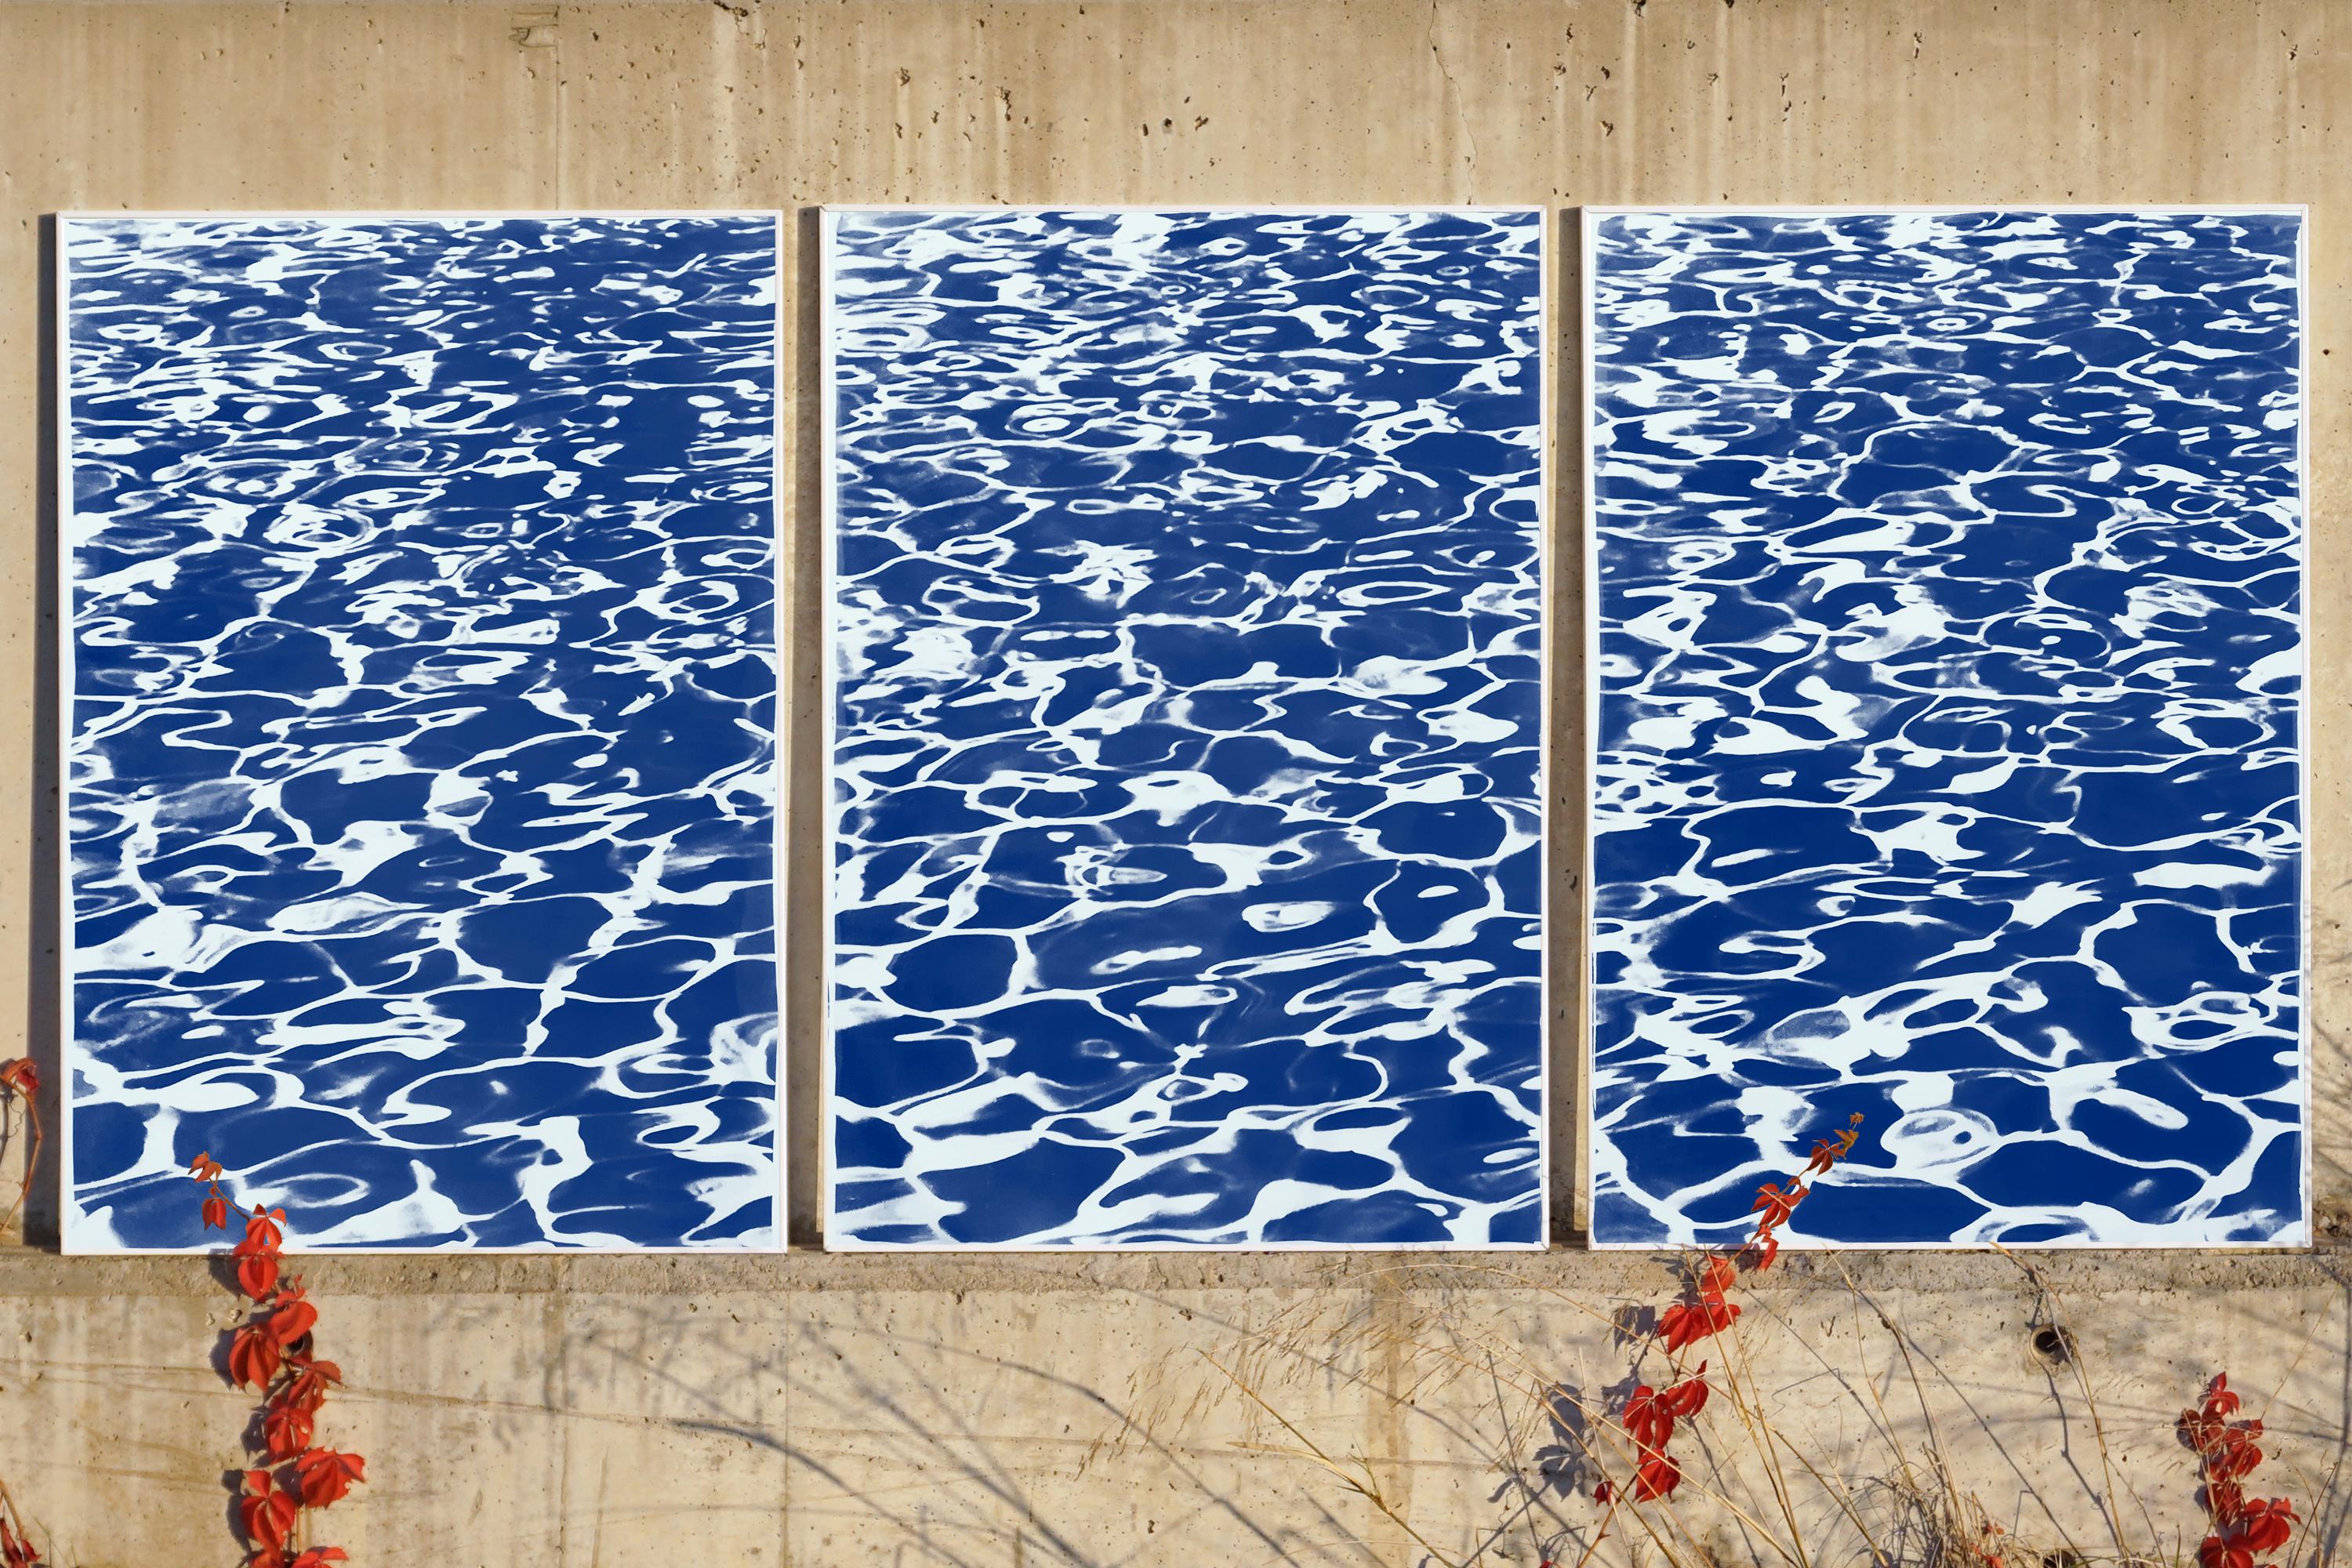 Pool Patterns, Nautical Abstract Seascape Triptych, Blue Cyanotype Print For Sale 3